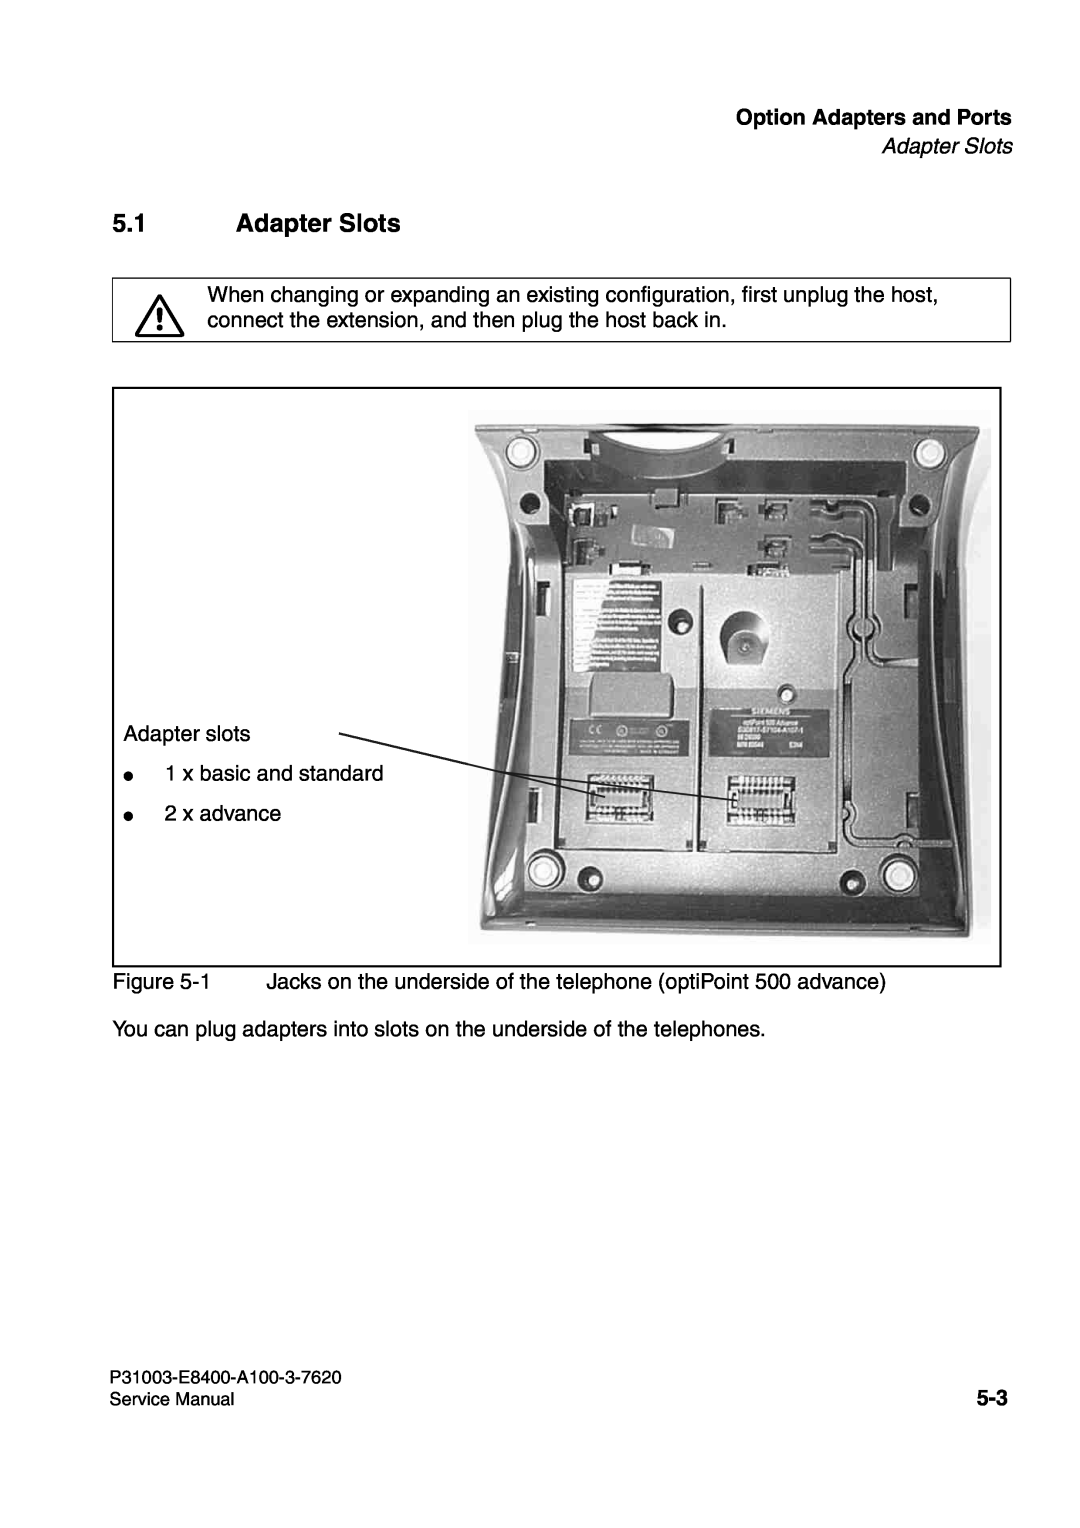 Siemens 500 service manual Adapter Slots, Option Adapters and Ports 